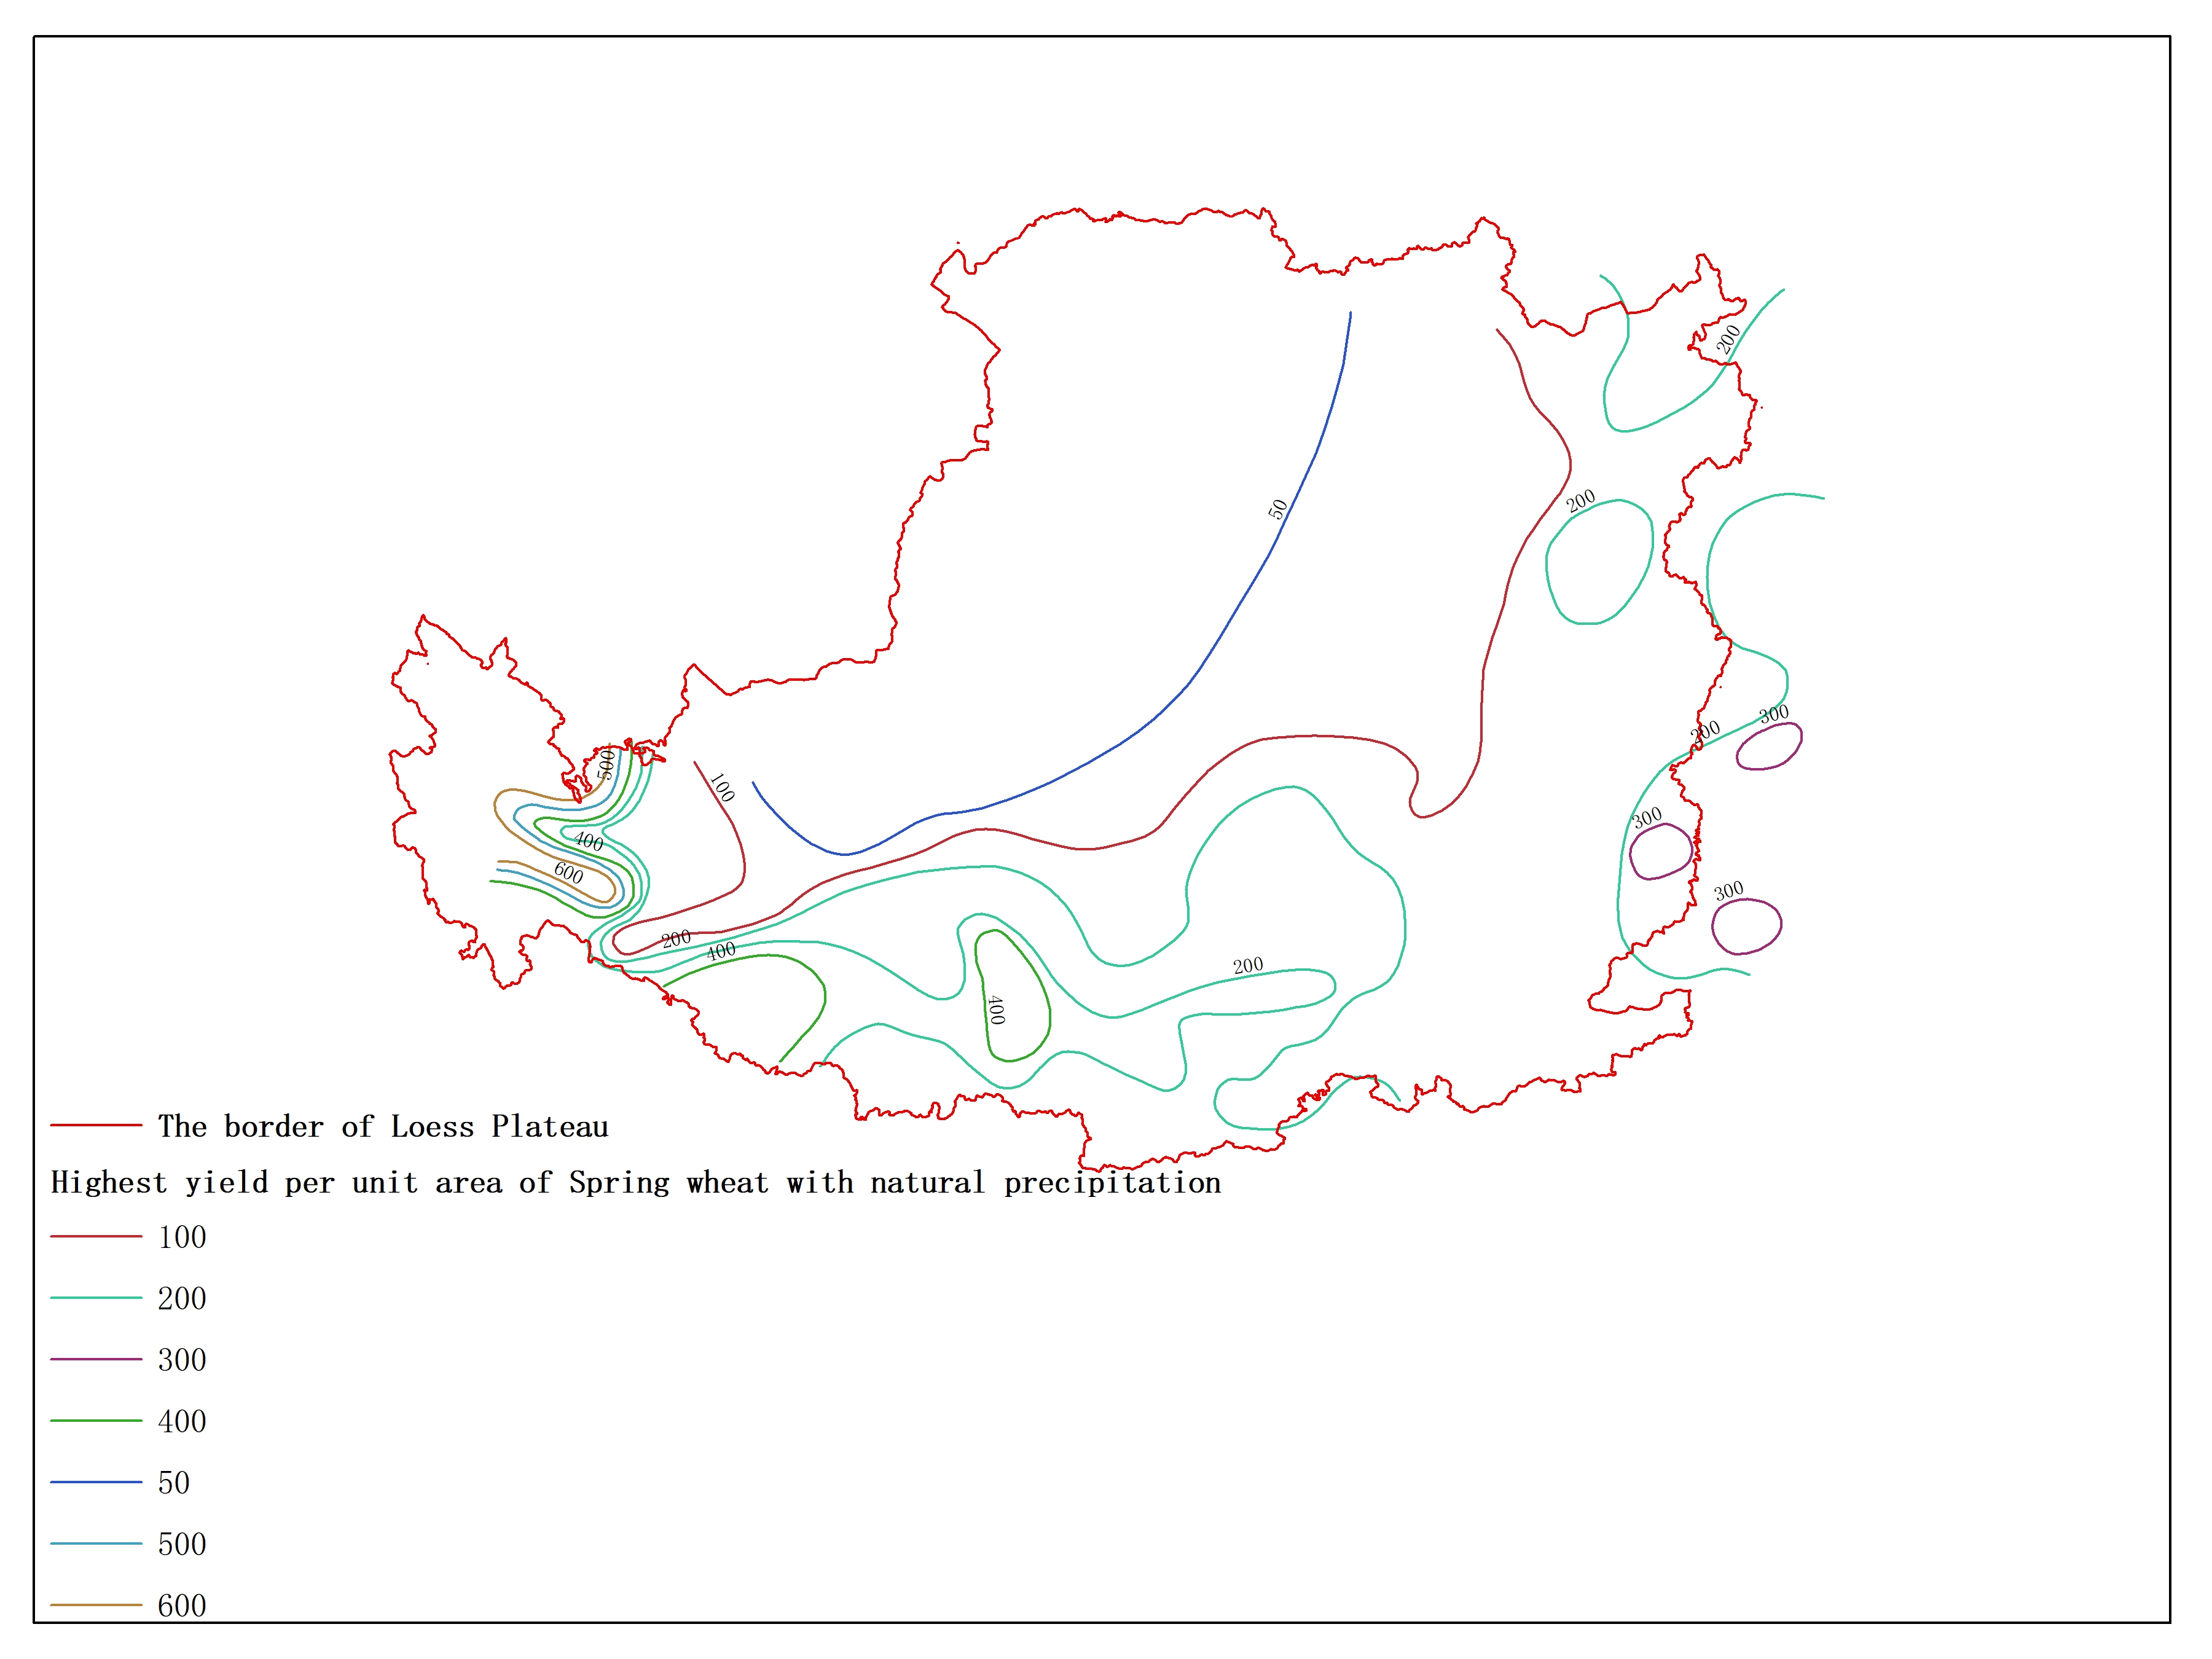 Agricultural climate resource atlas of Loess Plateau-Highest yield per unit area of Spring wheat with natural precipitation